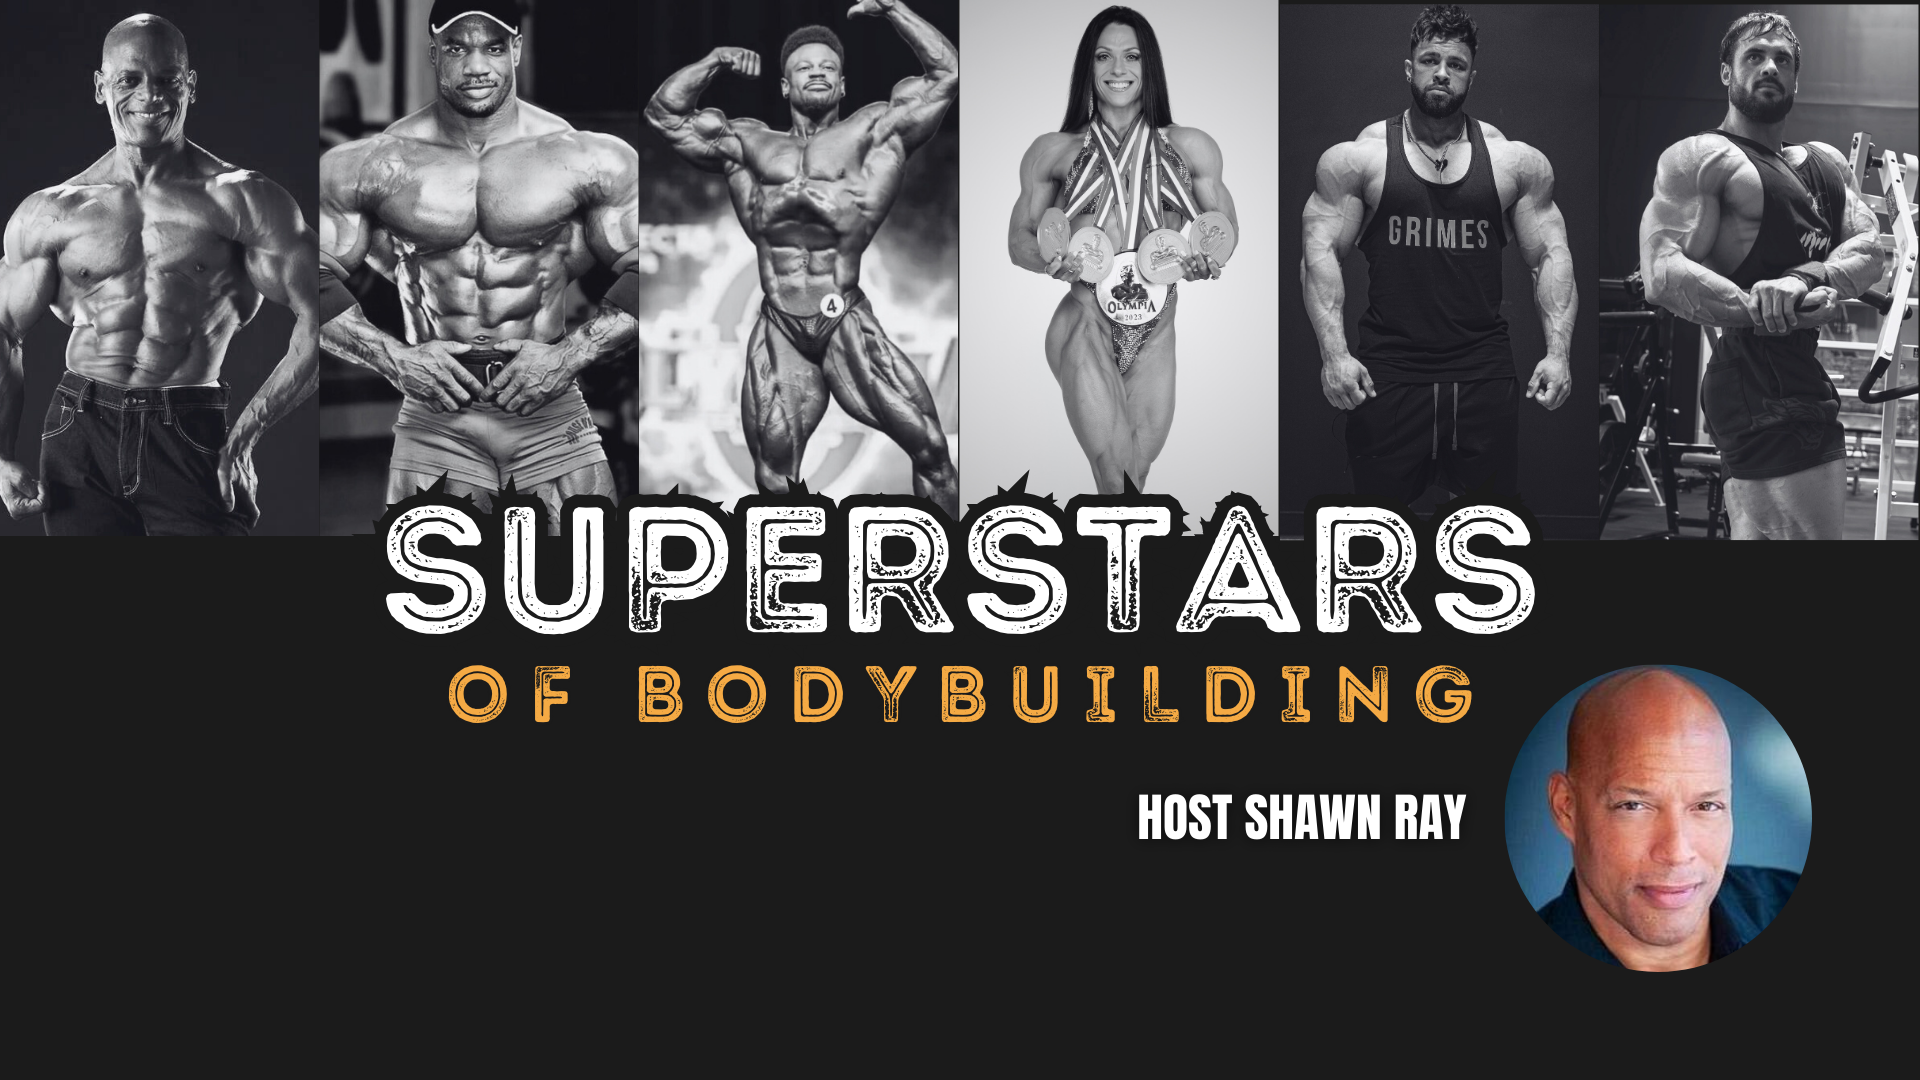 Saturday 3:45 PM – 4:30 PM<br>SUPERSTARS OF BODYBUILDING YESTERDAY & TODAY! Q&A